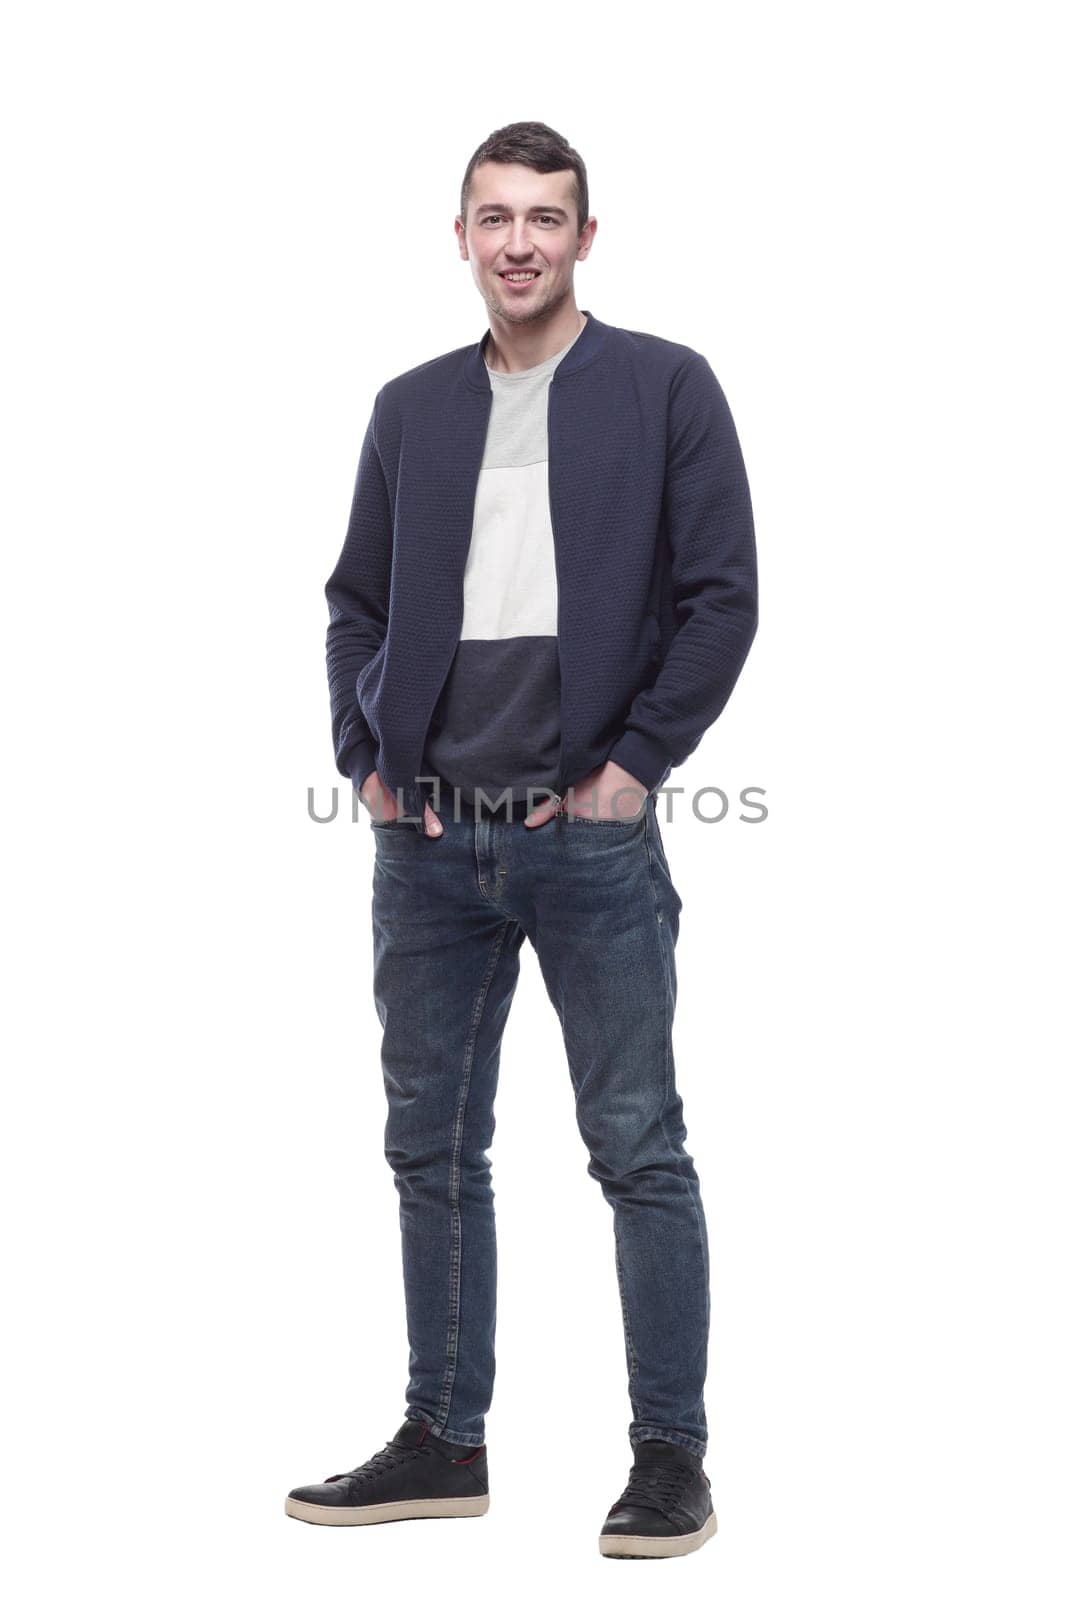 attractive young man in jeans and a jacket. by asdf